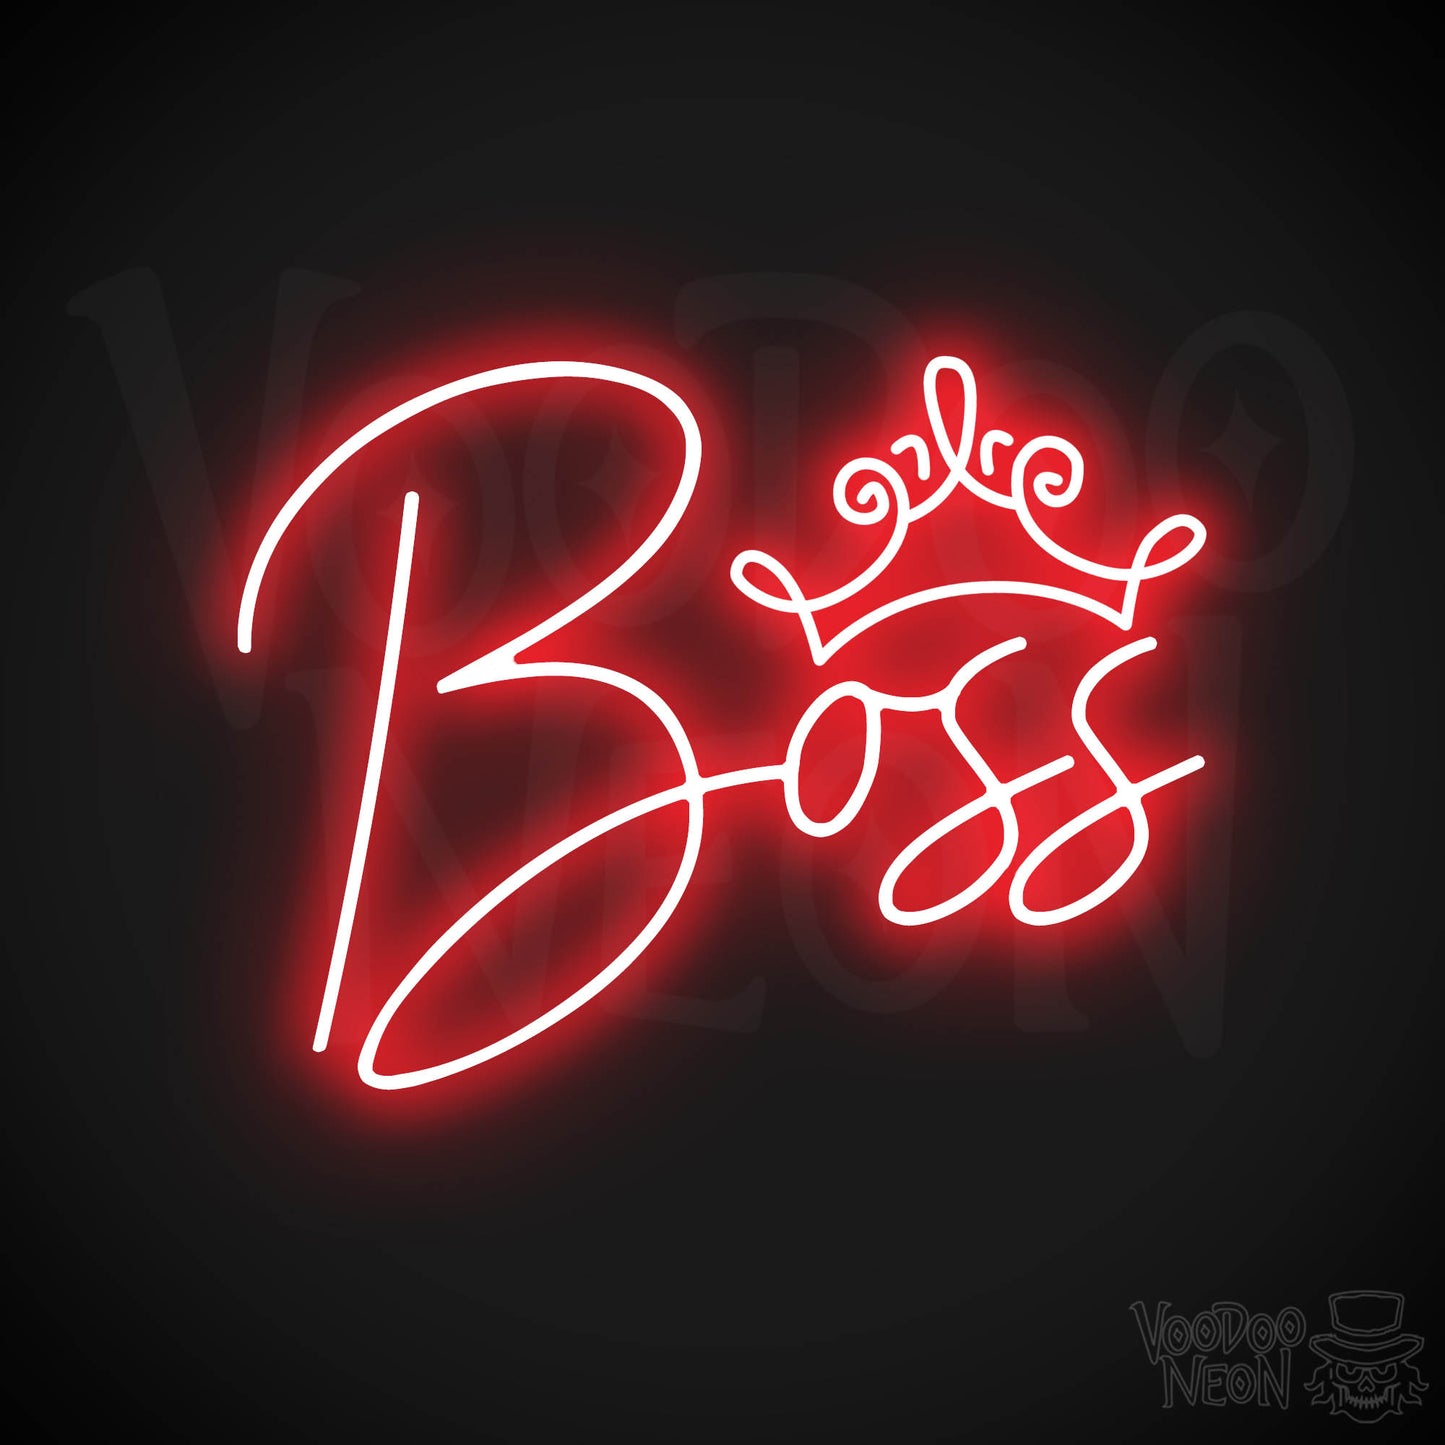 Boss Woman LED Neon - Red